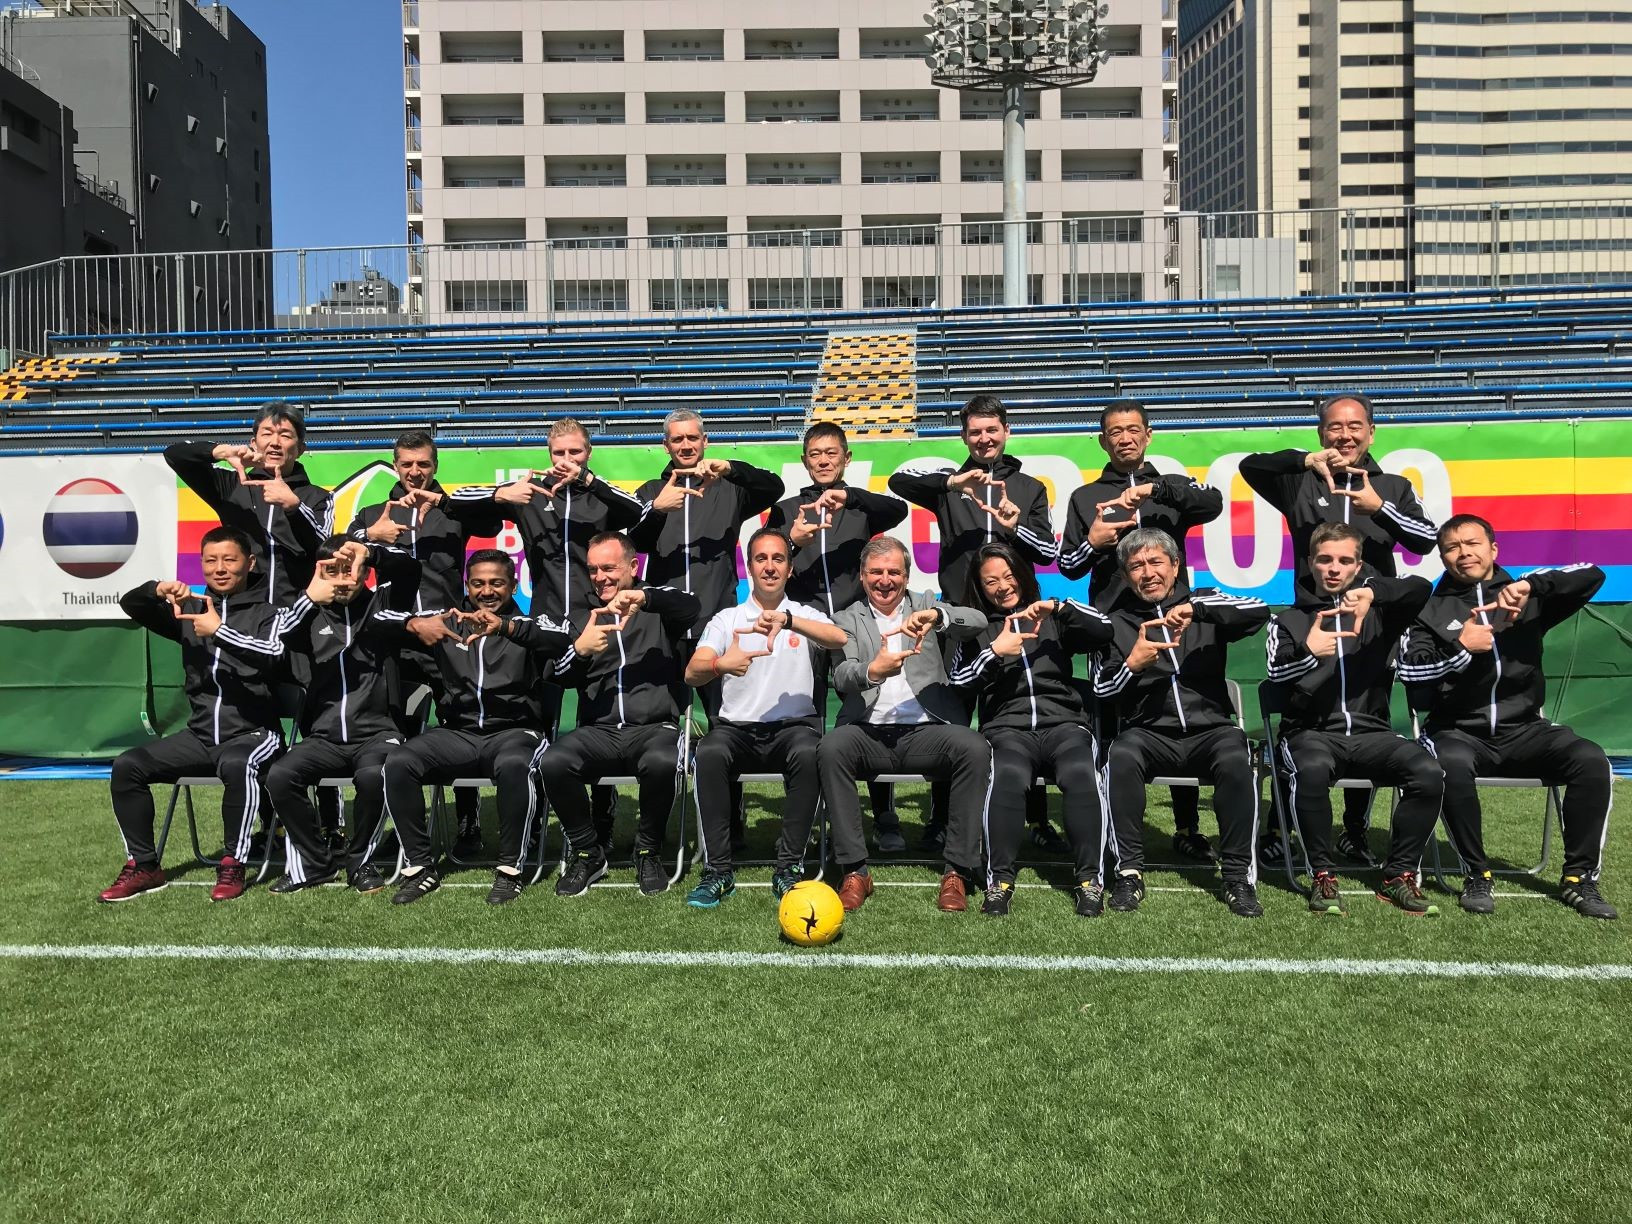 Referees also got involved with the Play True 2020 activities in Tokyo ©IBSA